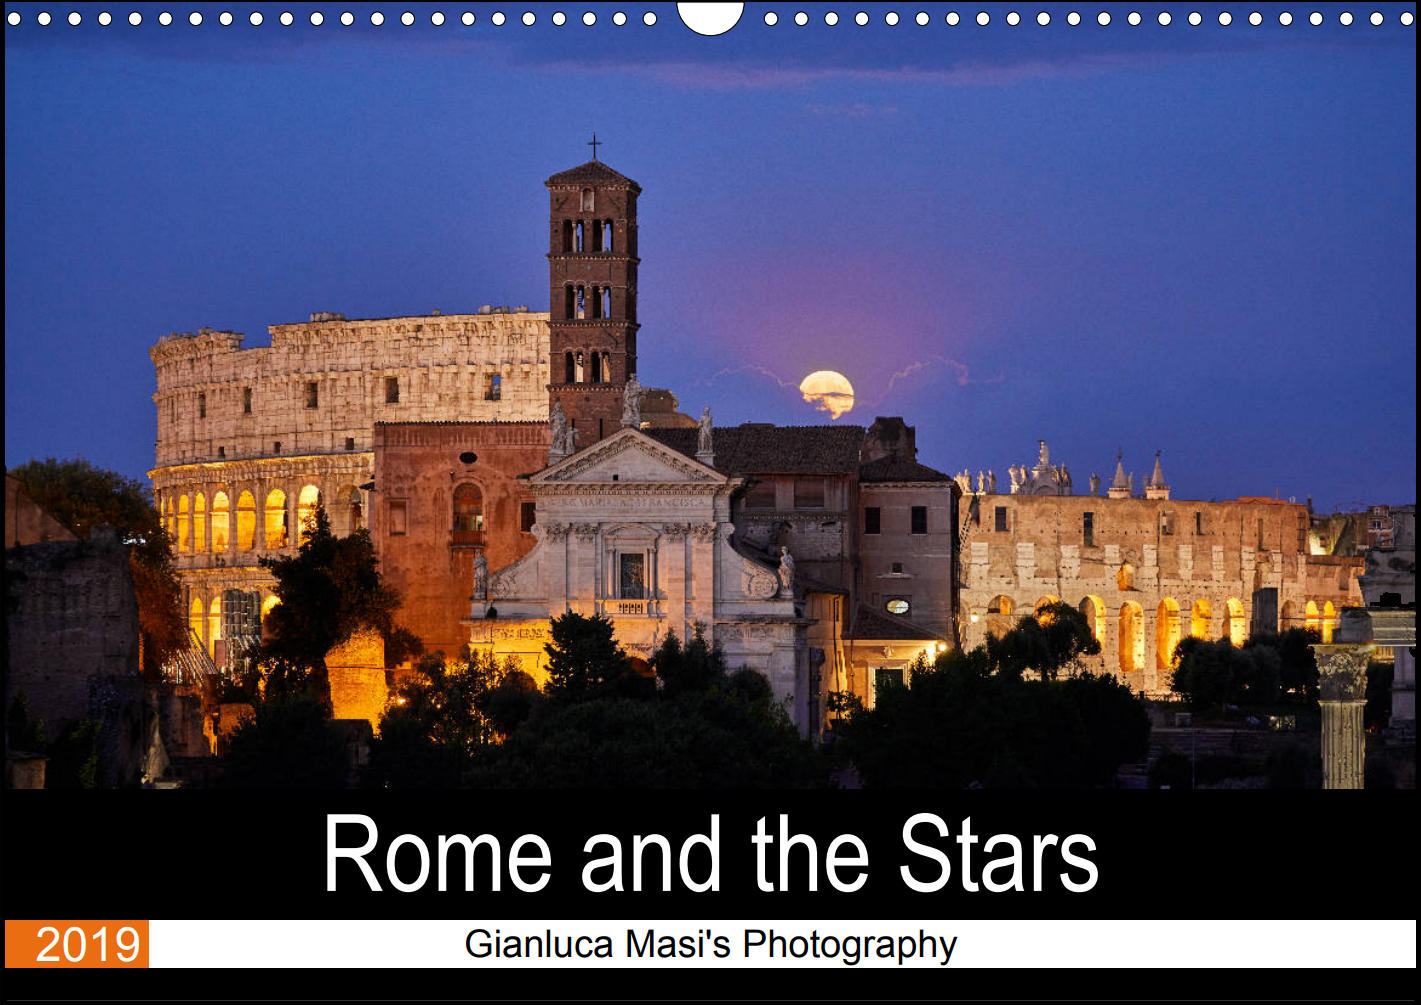 "Rome and the Stars": now available, free international shipping